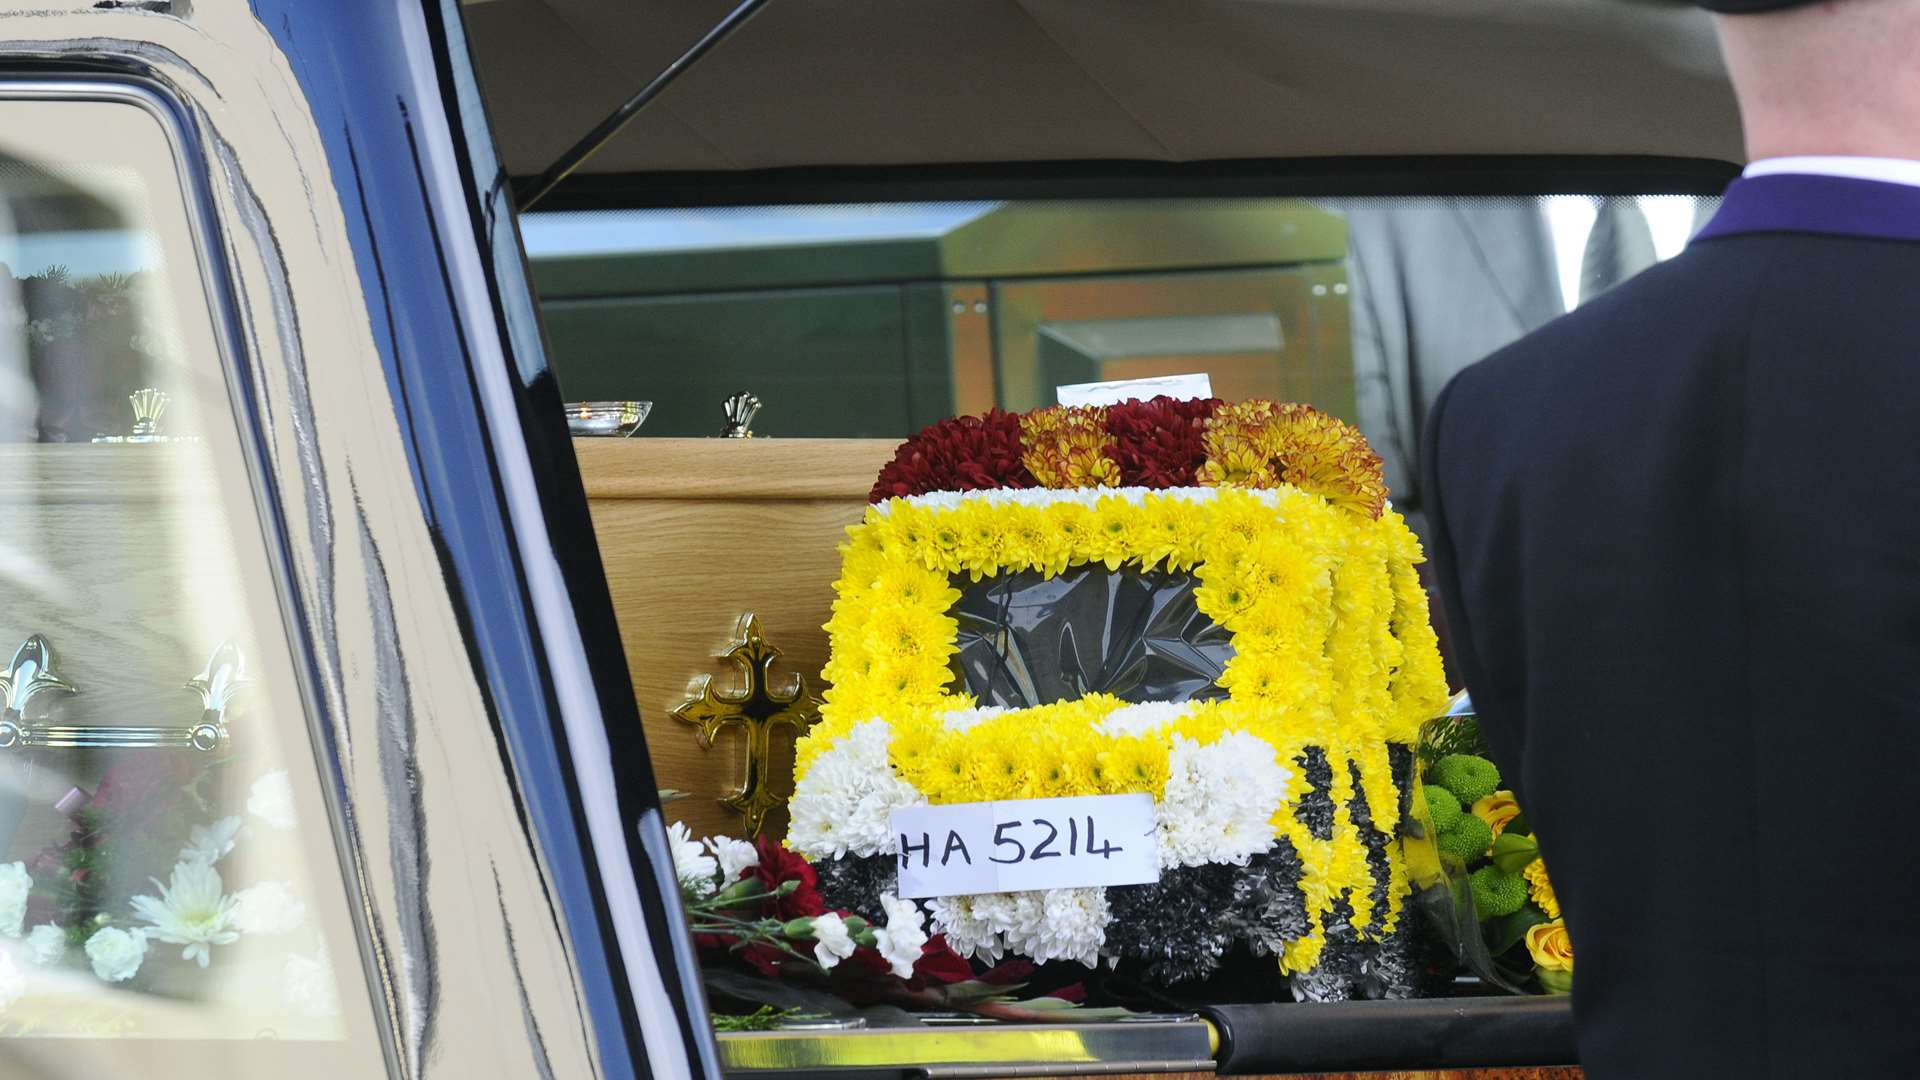 A special floral tribute was created for John Walmsley